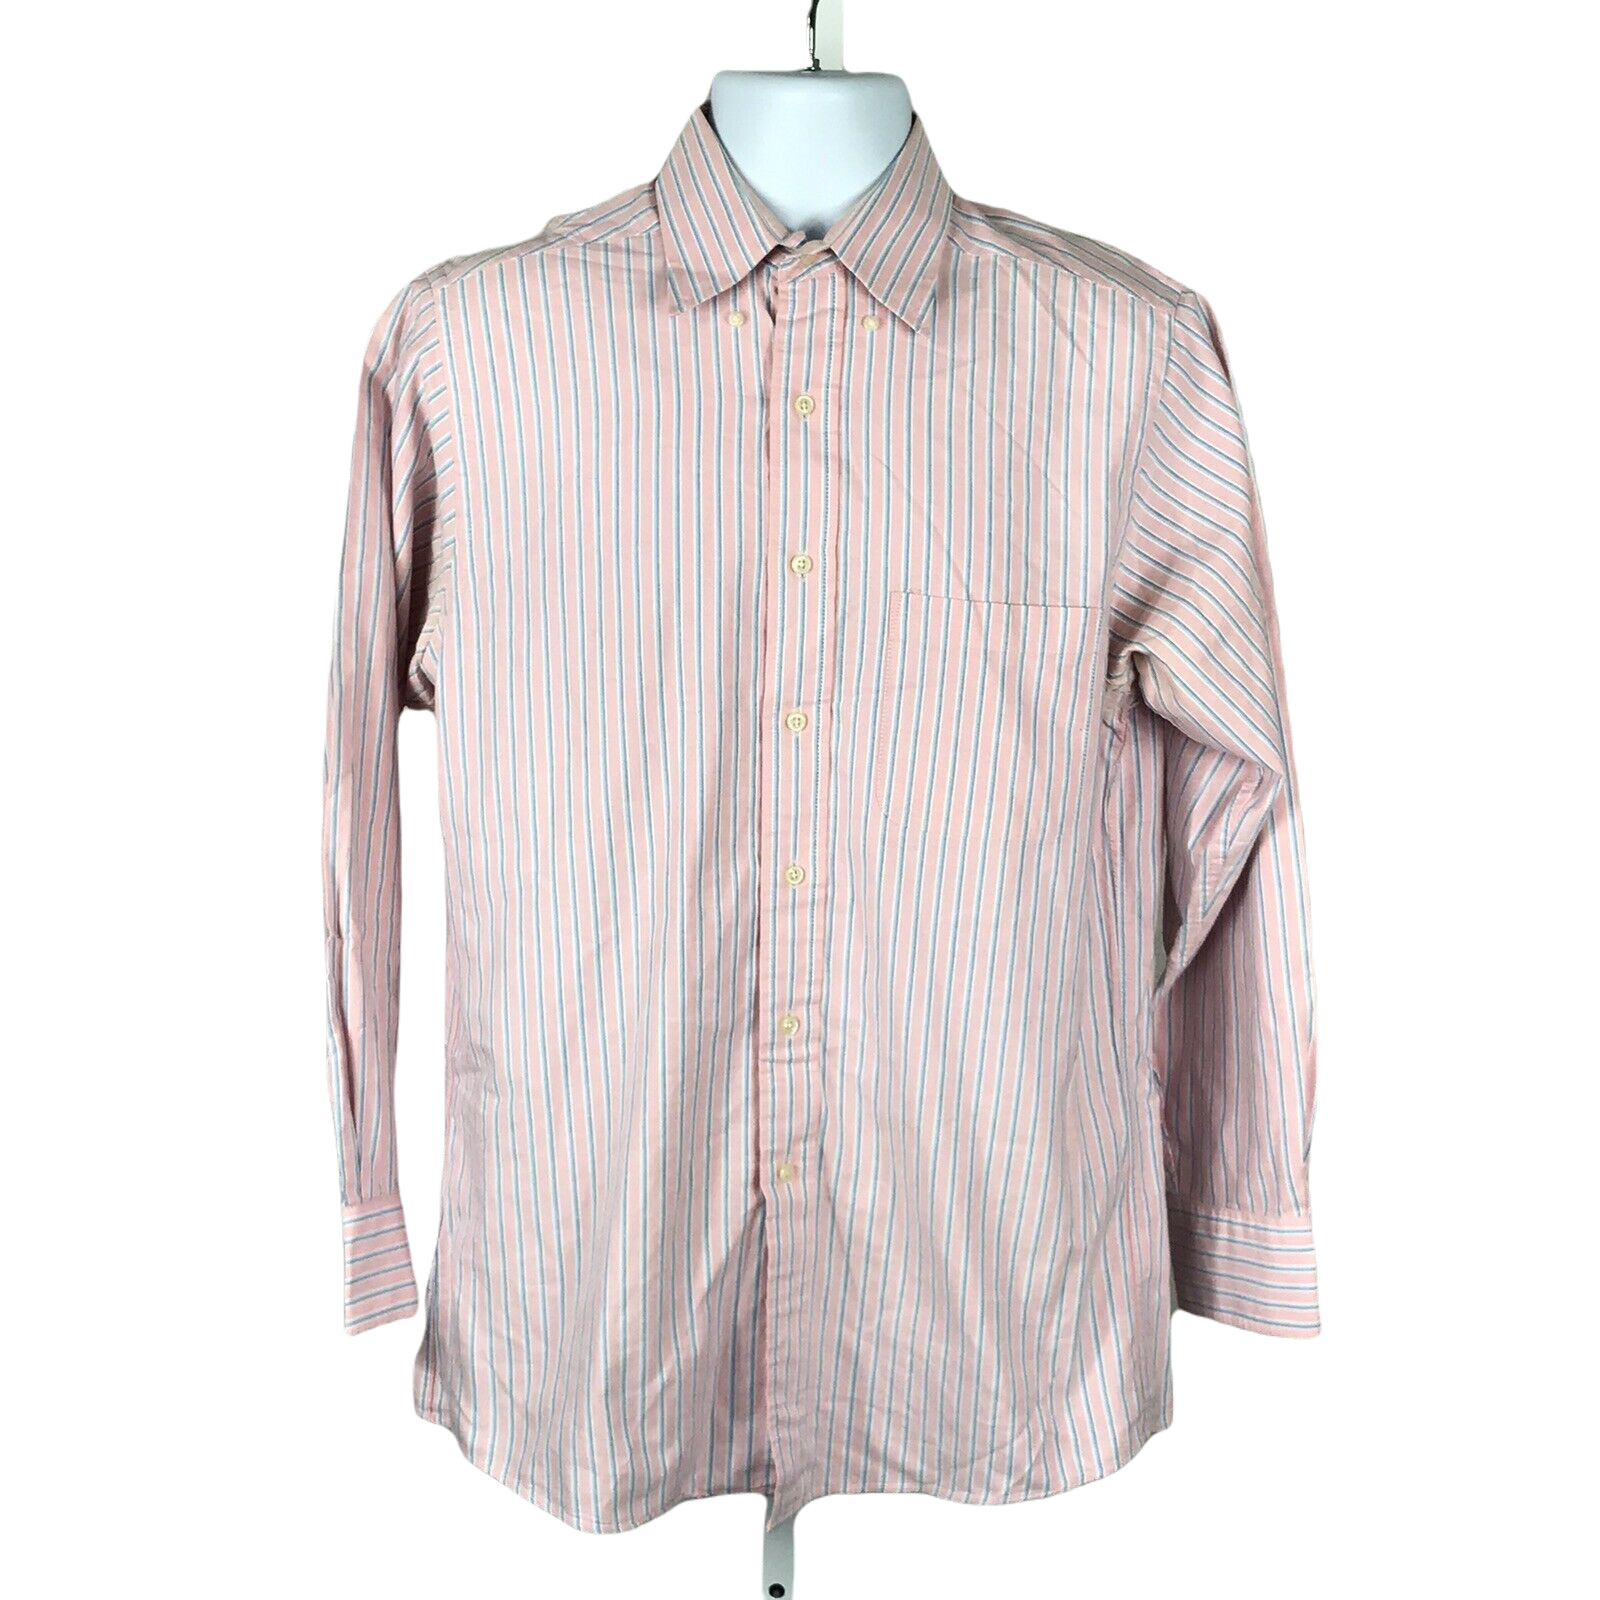 Primary image for IZOD Men's Button Up Dress Shirt ~ Sz 15 32/33 M ~ Pink & White ~ Long Sleeve